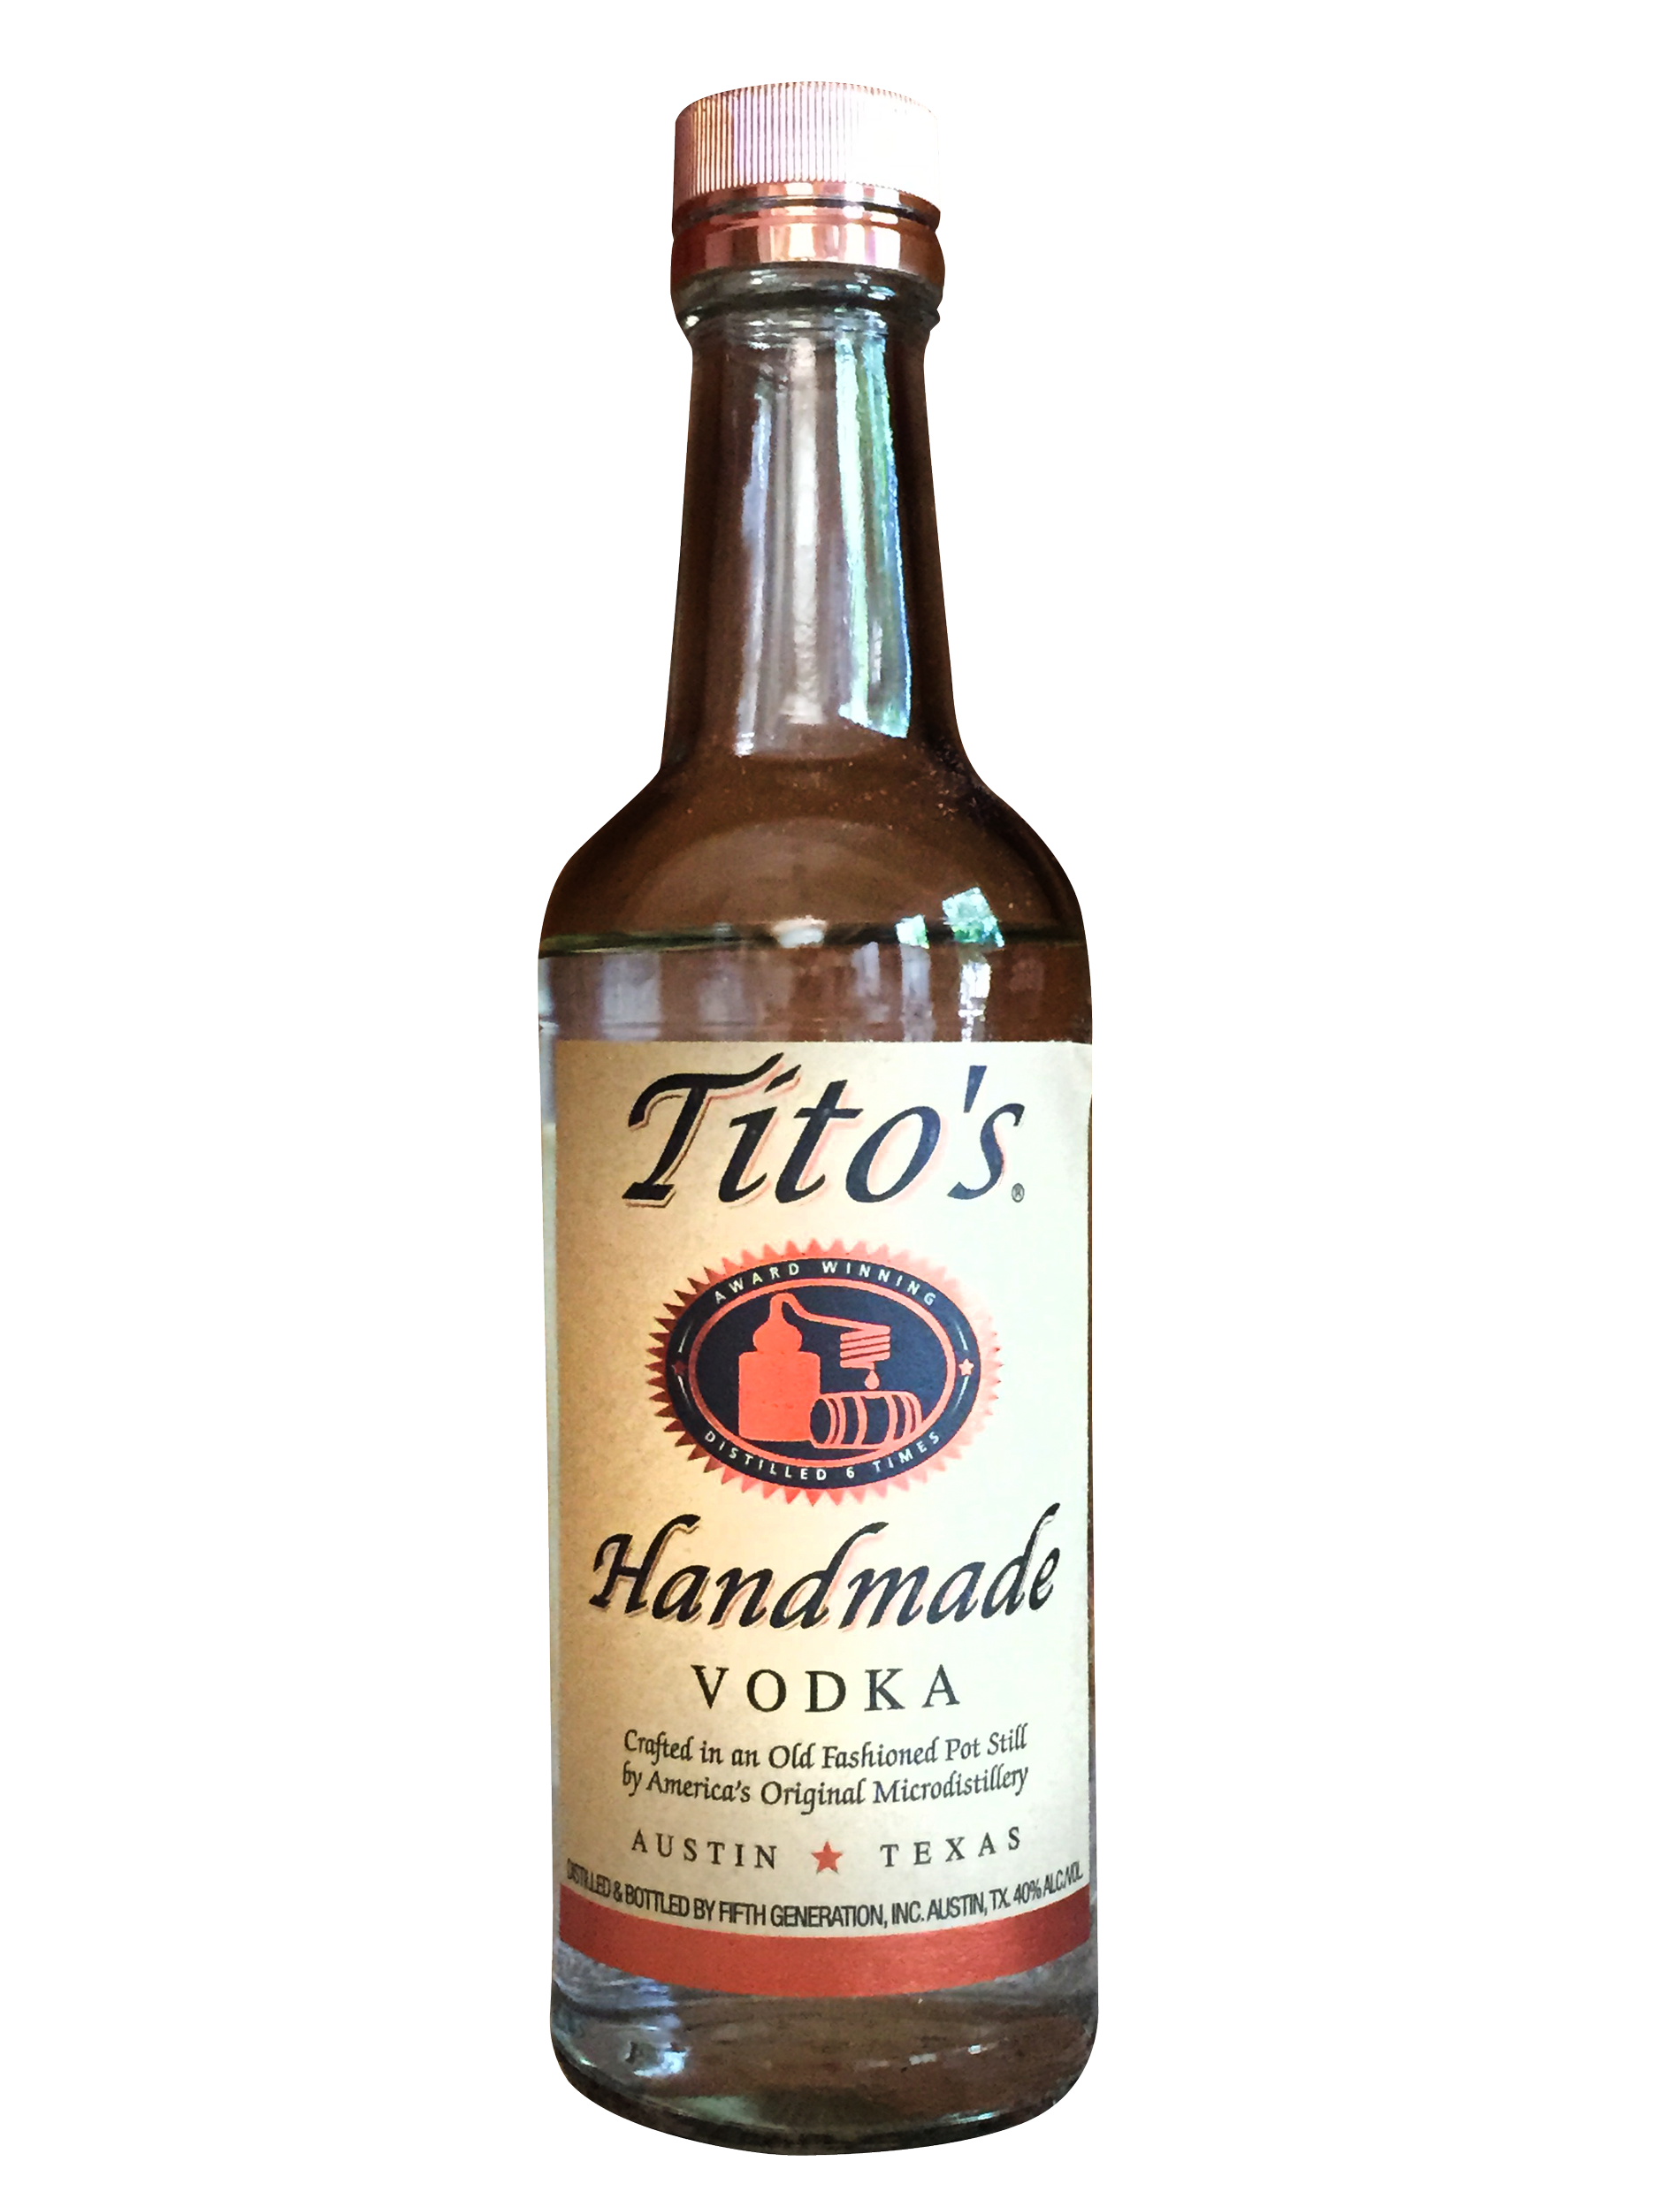 A Bottle Of Alcohol With A Label